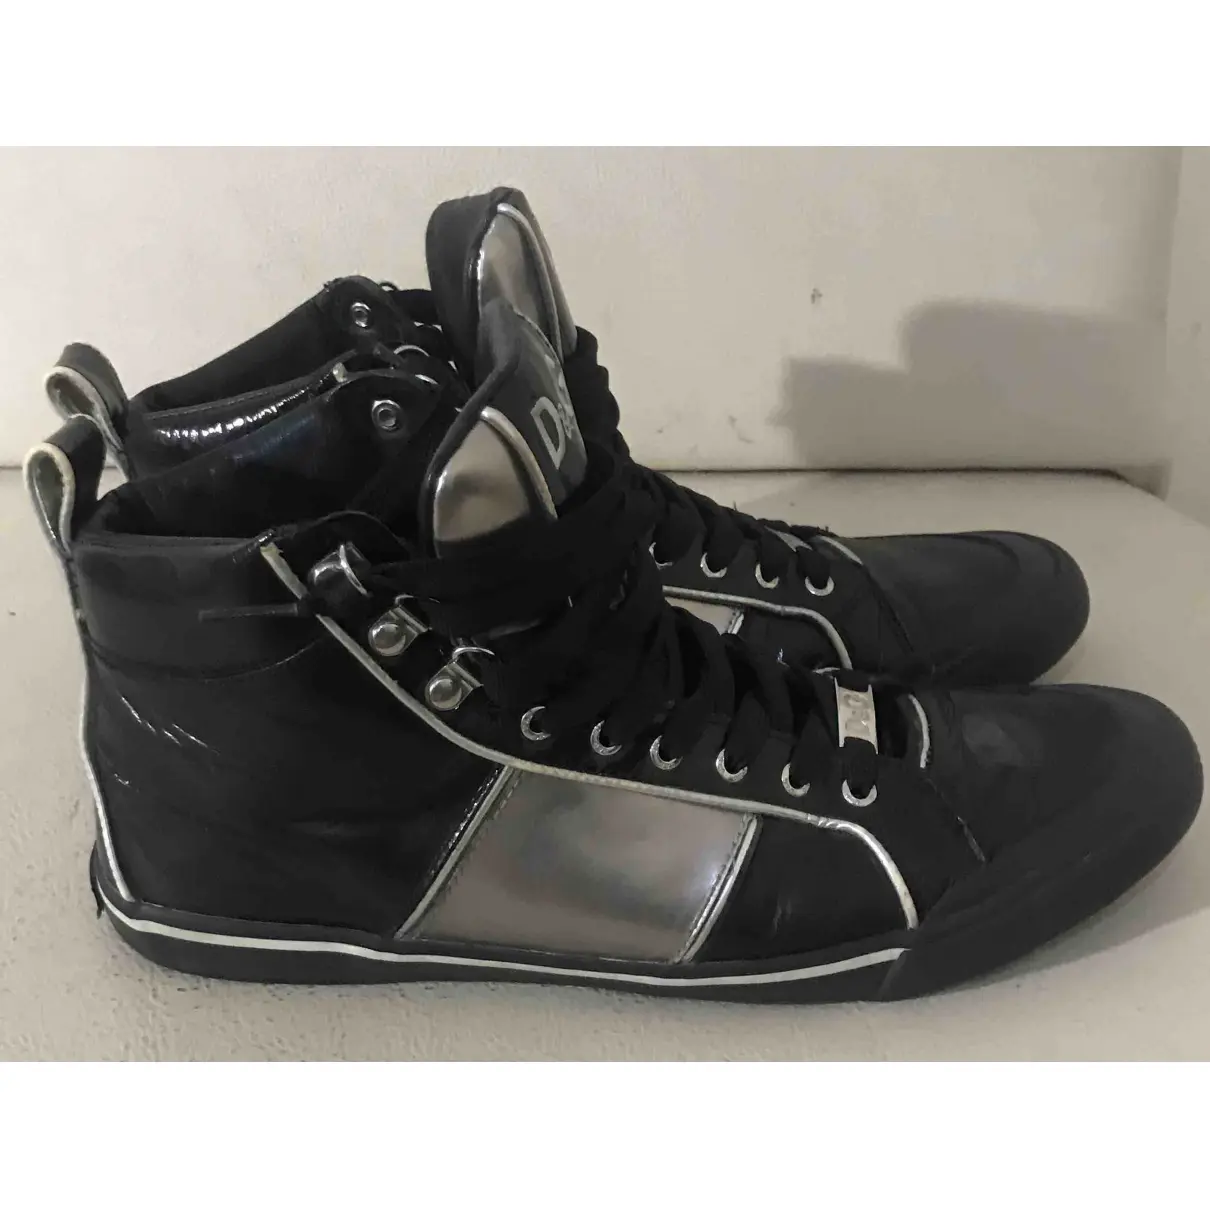 Patent leather high trainers D&G